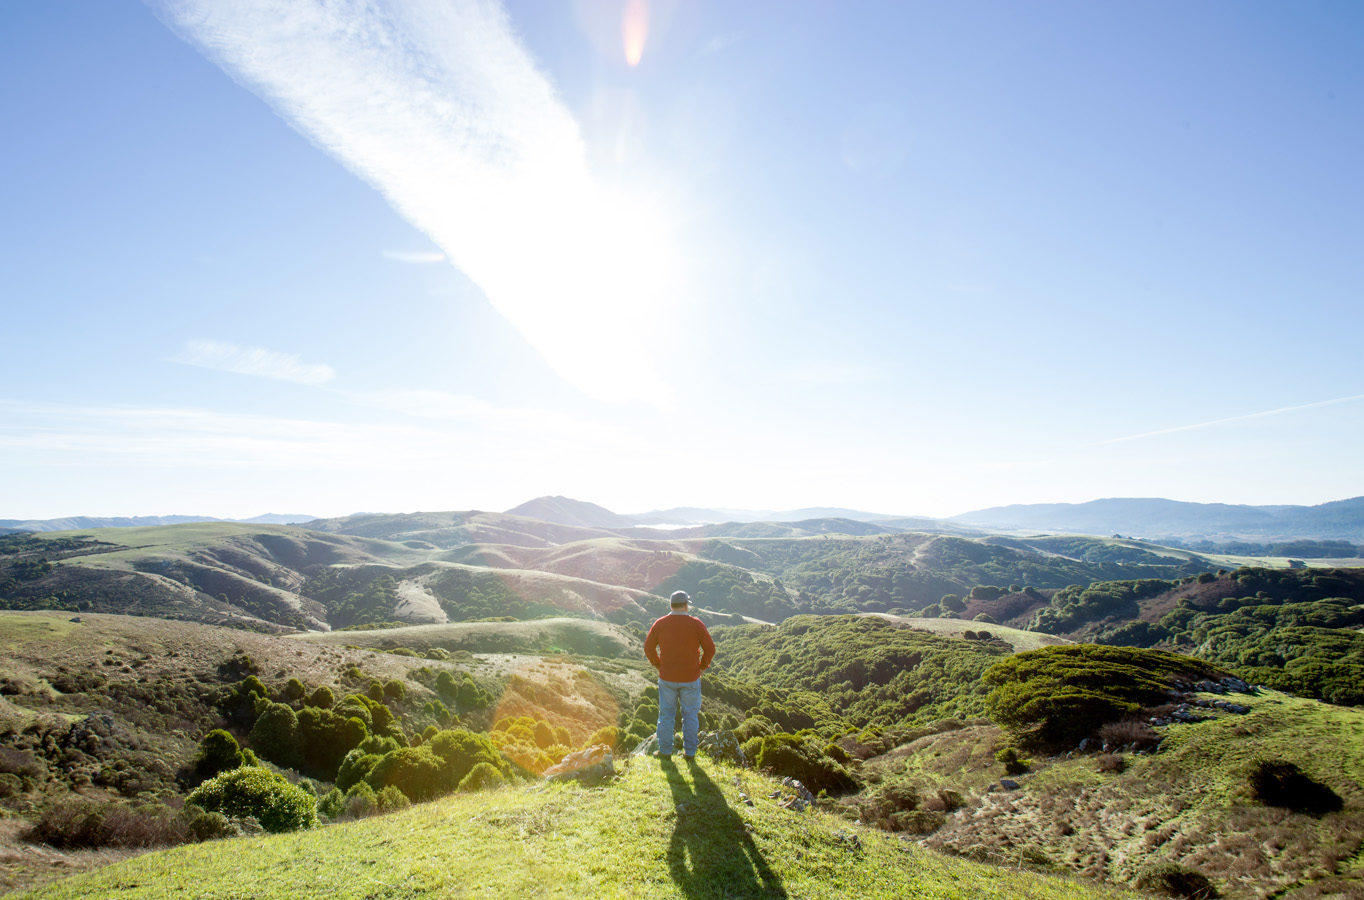 Man atop a green hill, looking out at more rolling hills, sunshine, and blue skies. Photo by Paige Green.